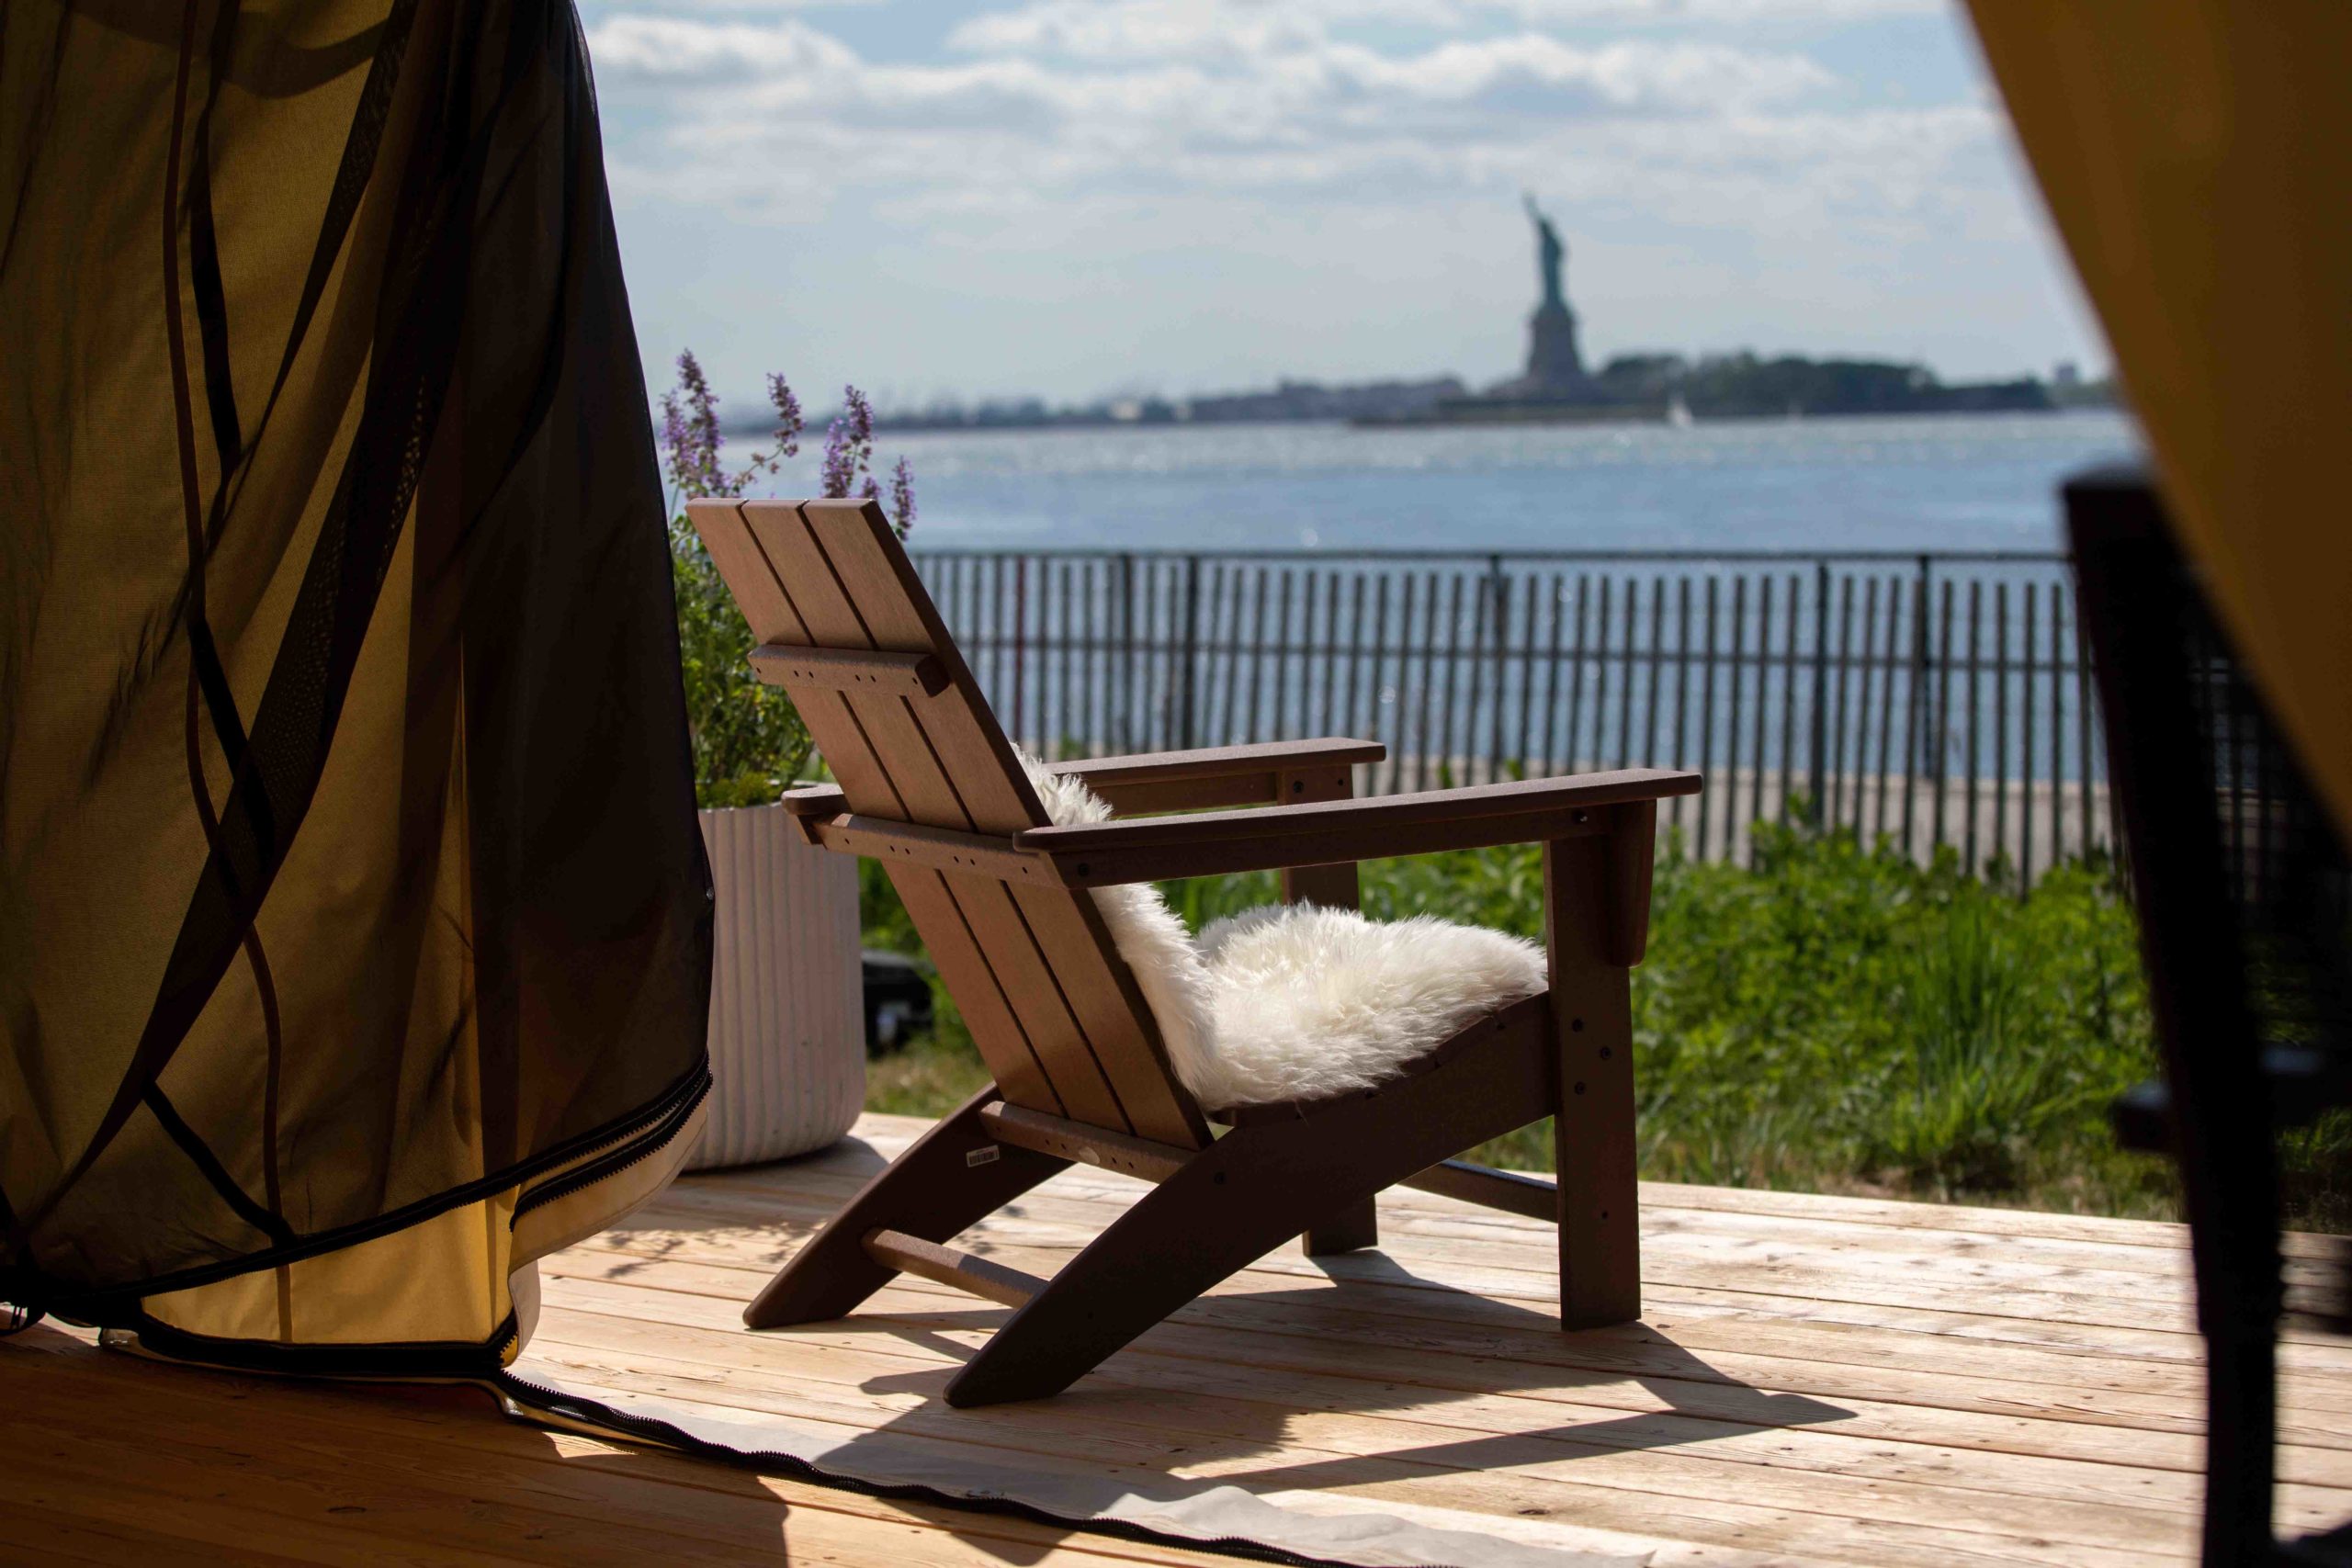 Statue of liberty from tent